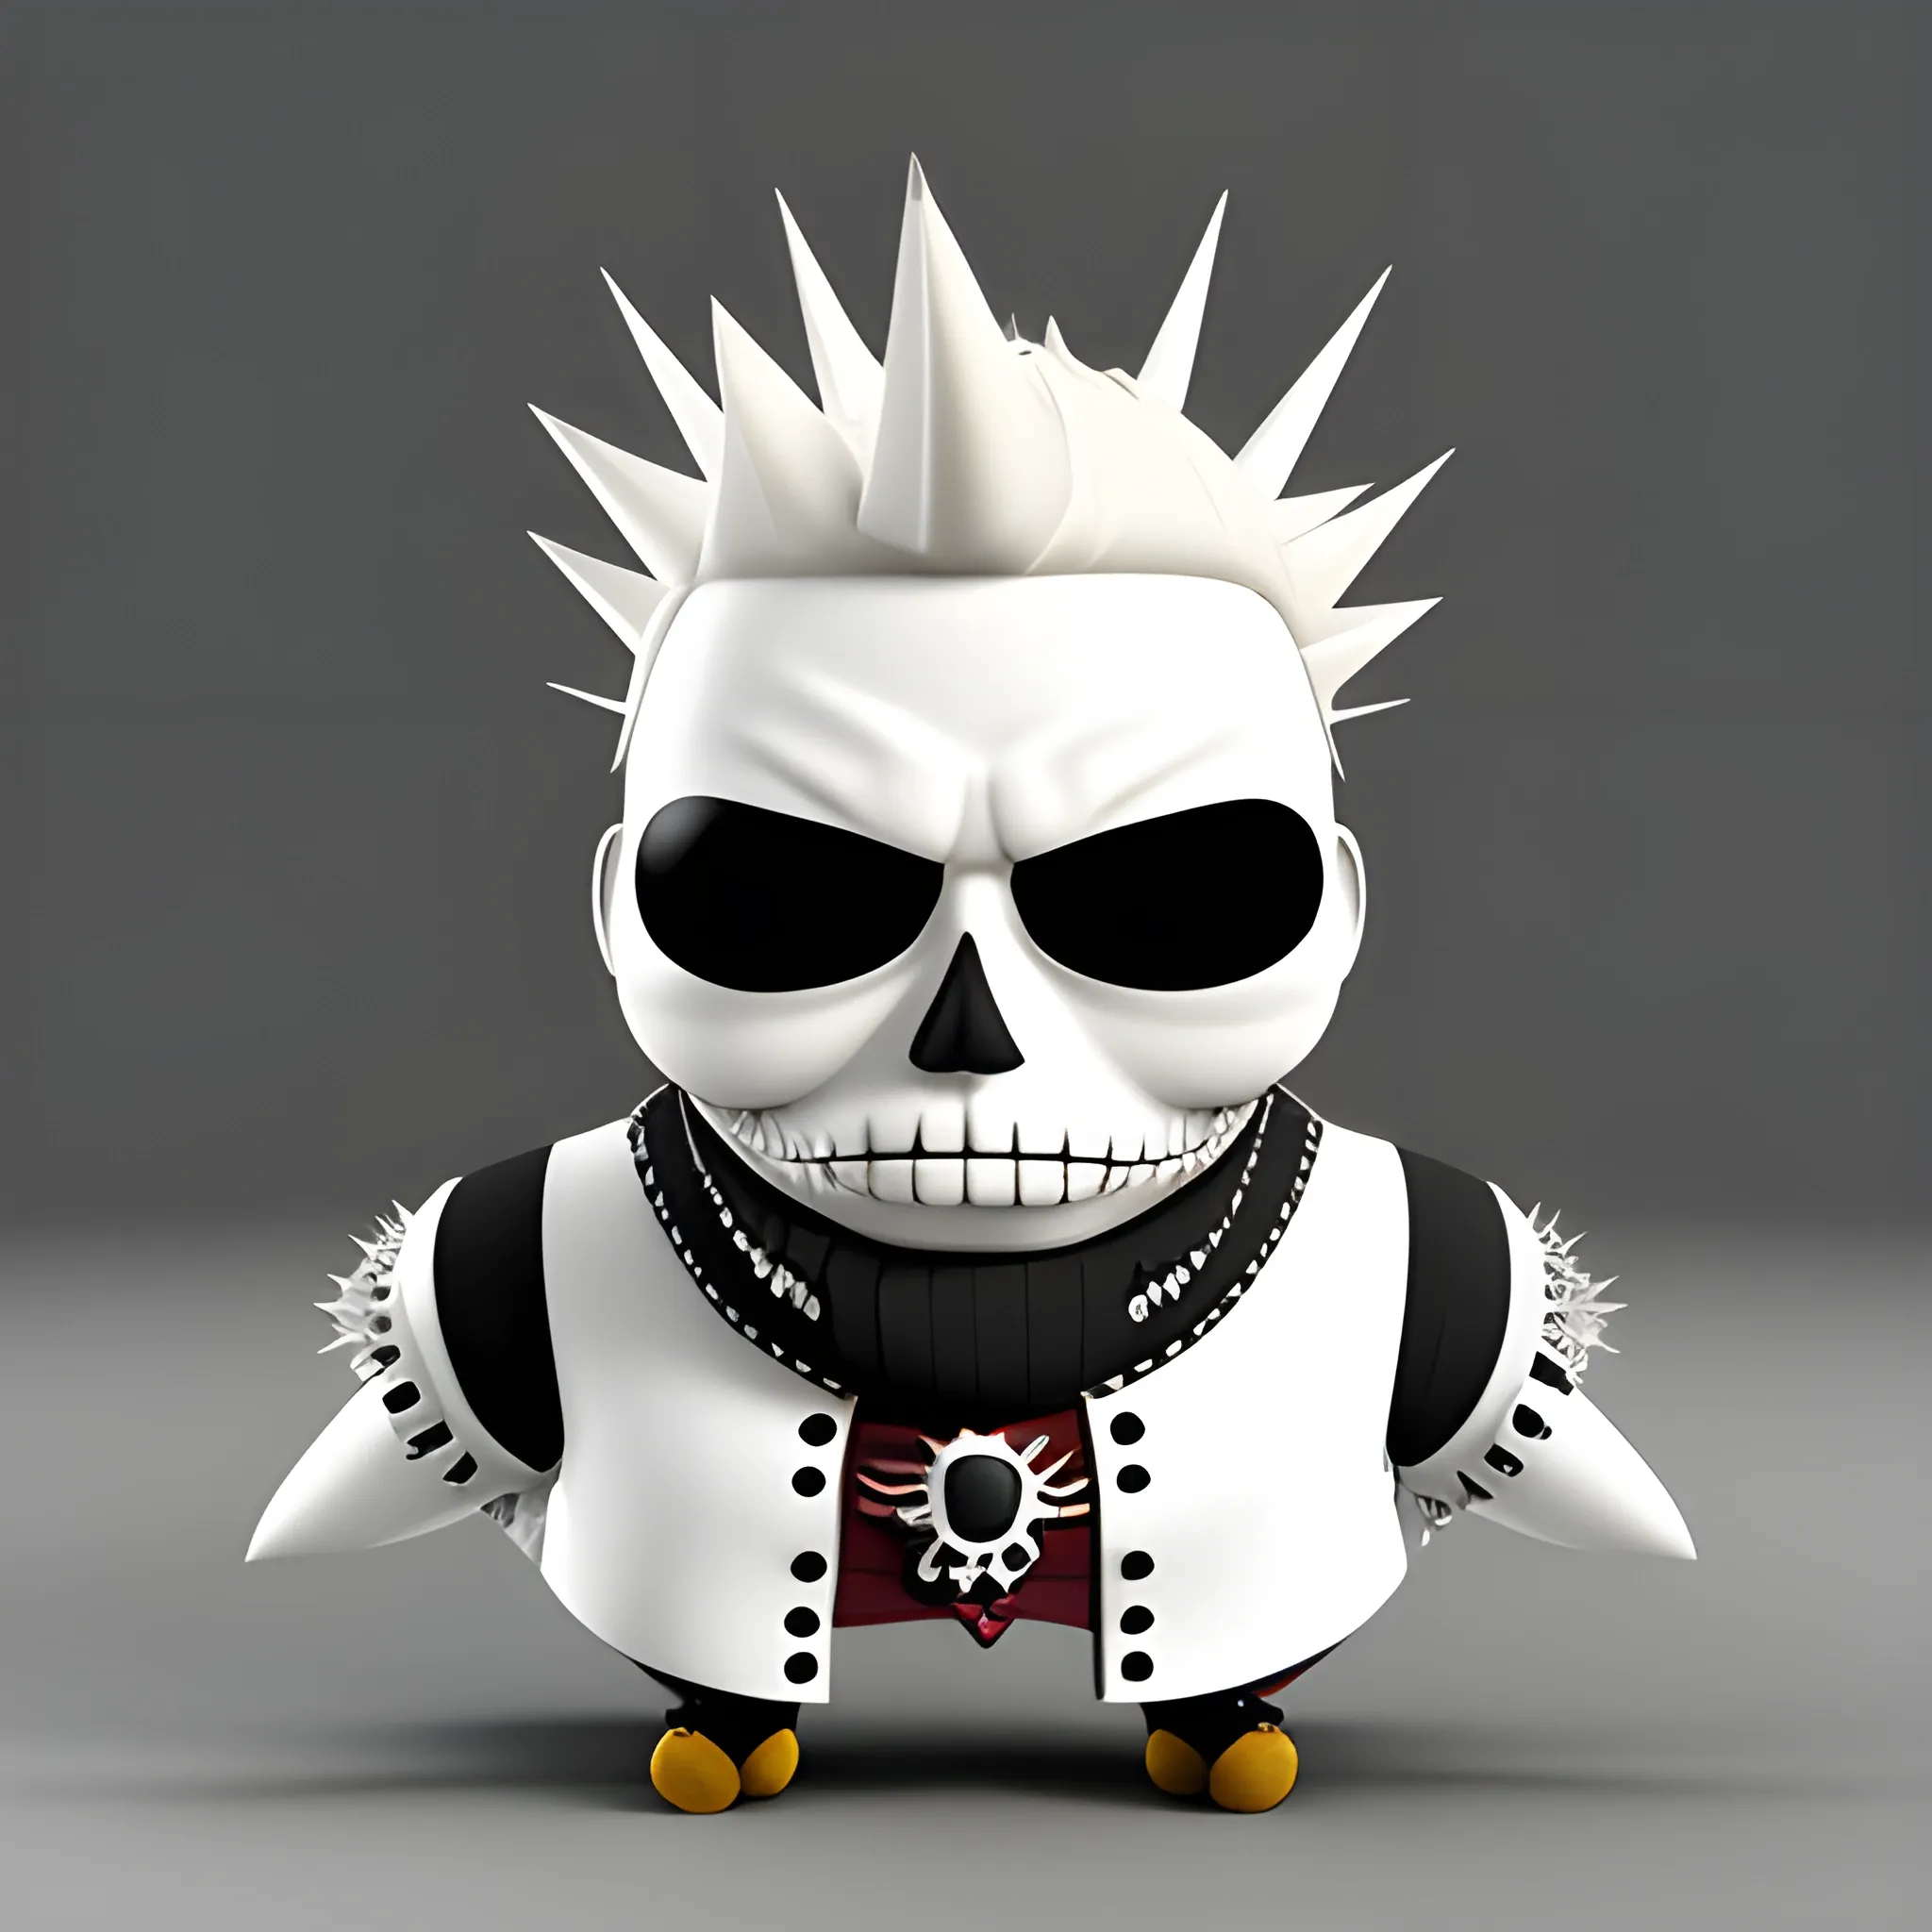 
3D White Spiky Head Punk Mascot Facing front, Pirate Left Eye Patch